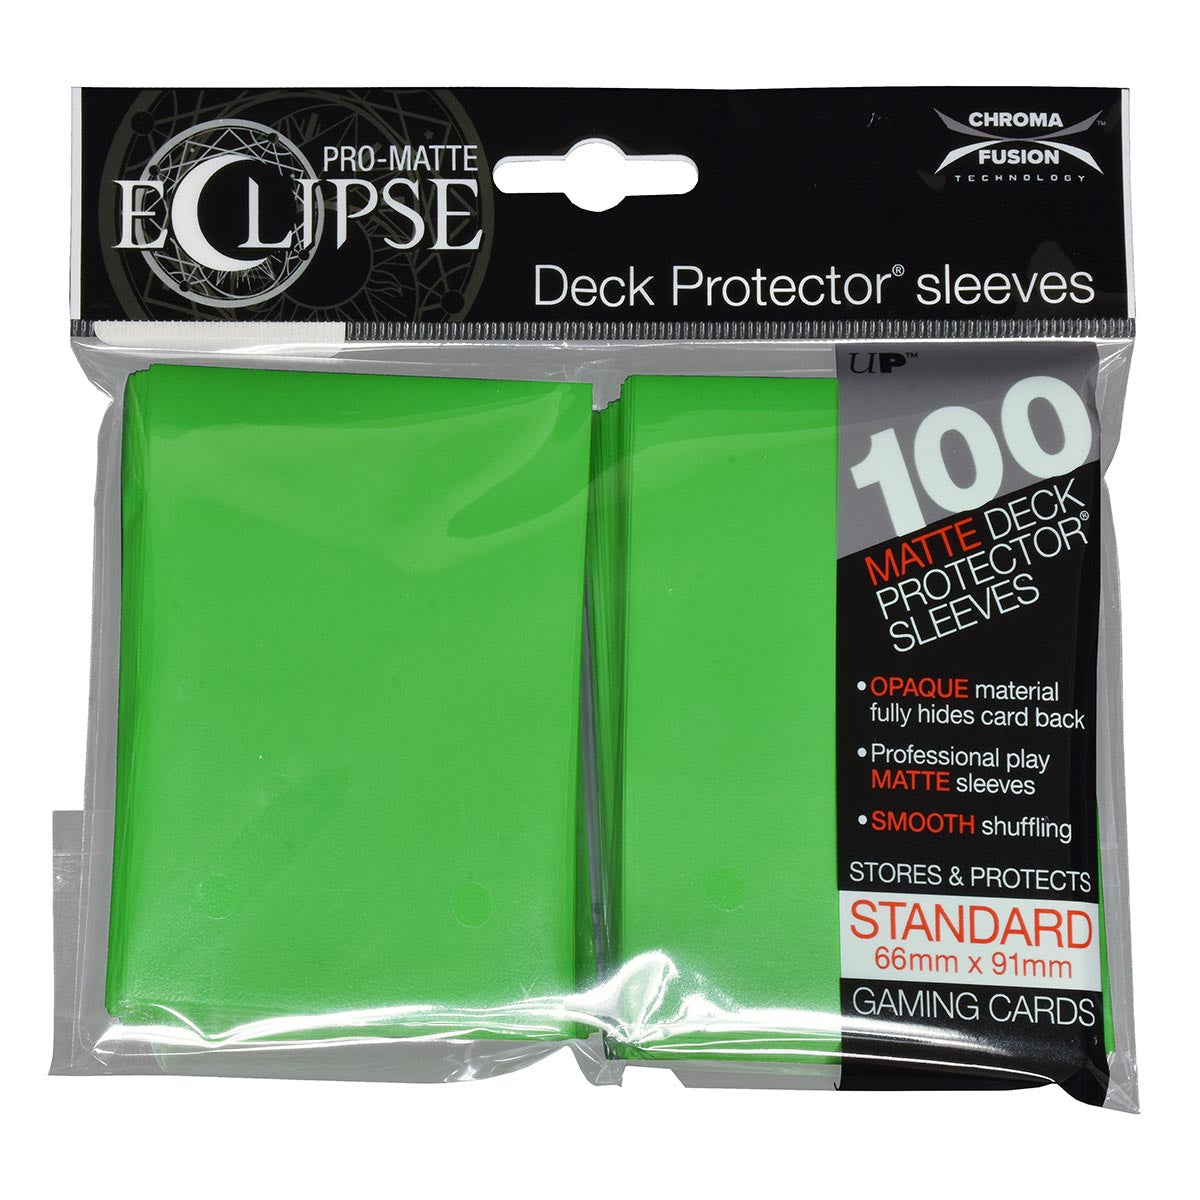 ULTRA PRO PRO-MATTE DECK PROTECTOR SLEEVES 100 PACK - LIME GREEN